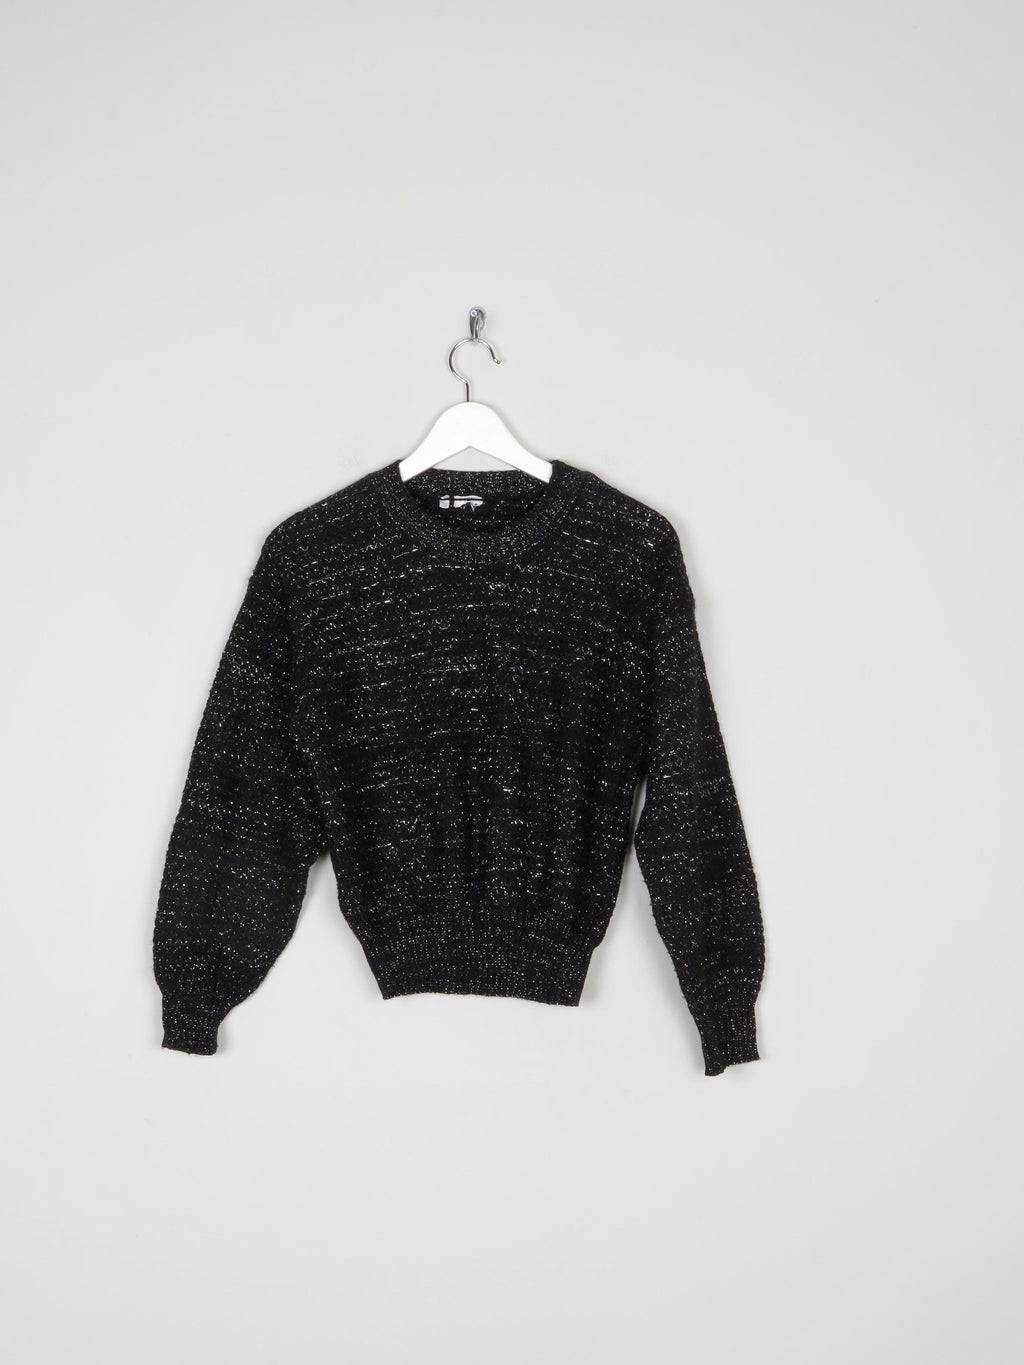 Women’s Black Lurex & Knitted Cropped Jumper S - The Harlequin